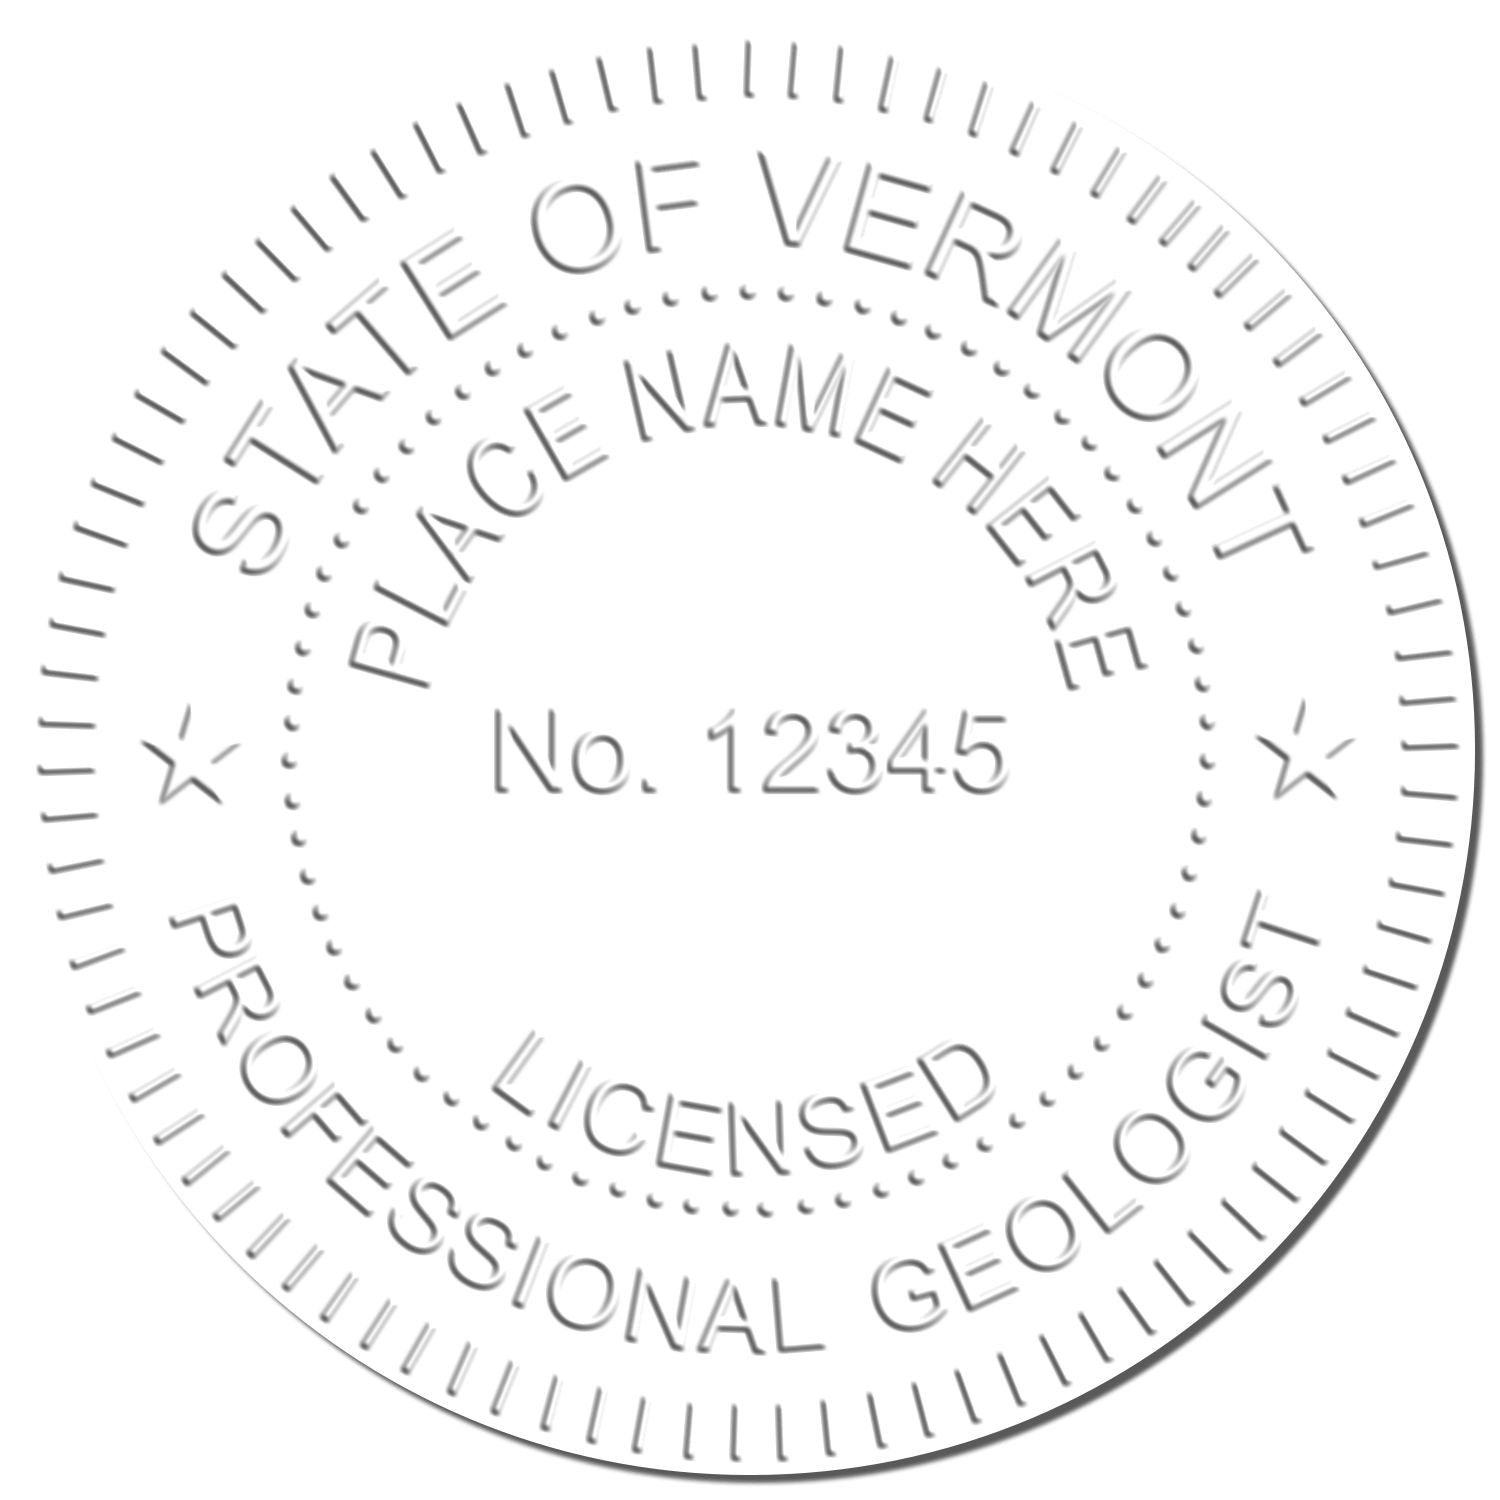 The main image for the Vermont Geologist Desk Seal depicting a sample of the imprint and imprint sample